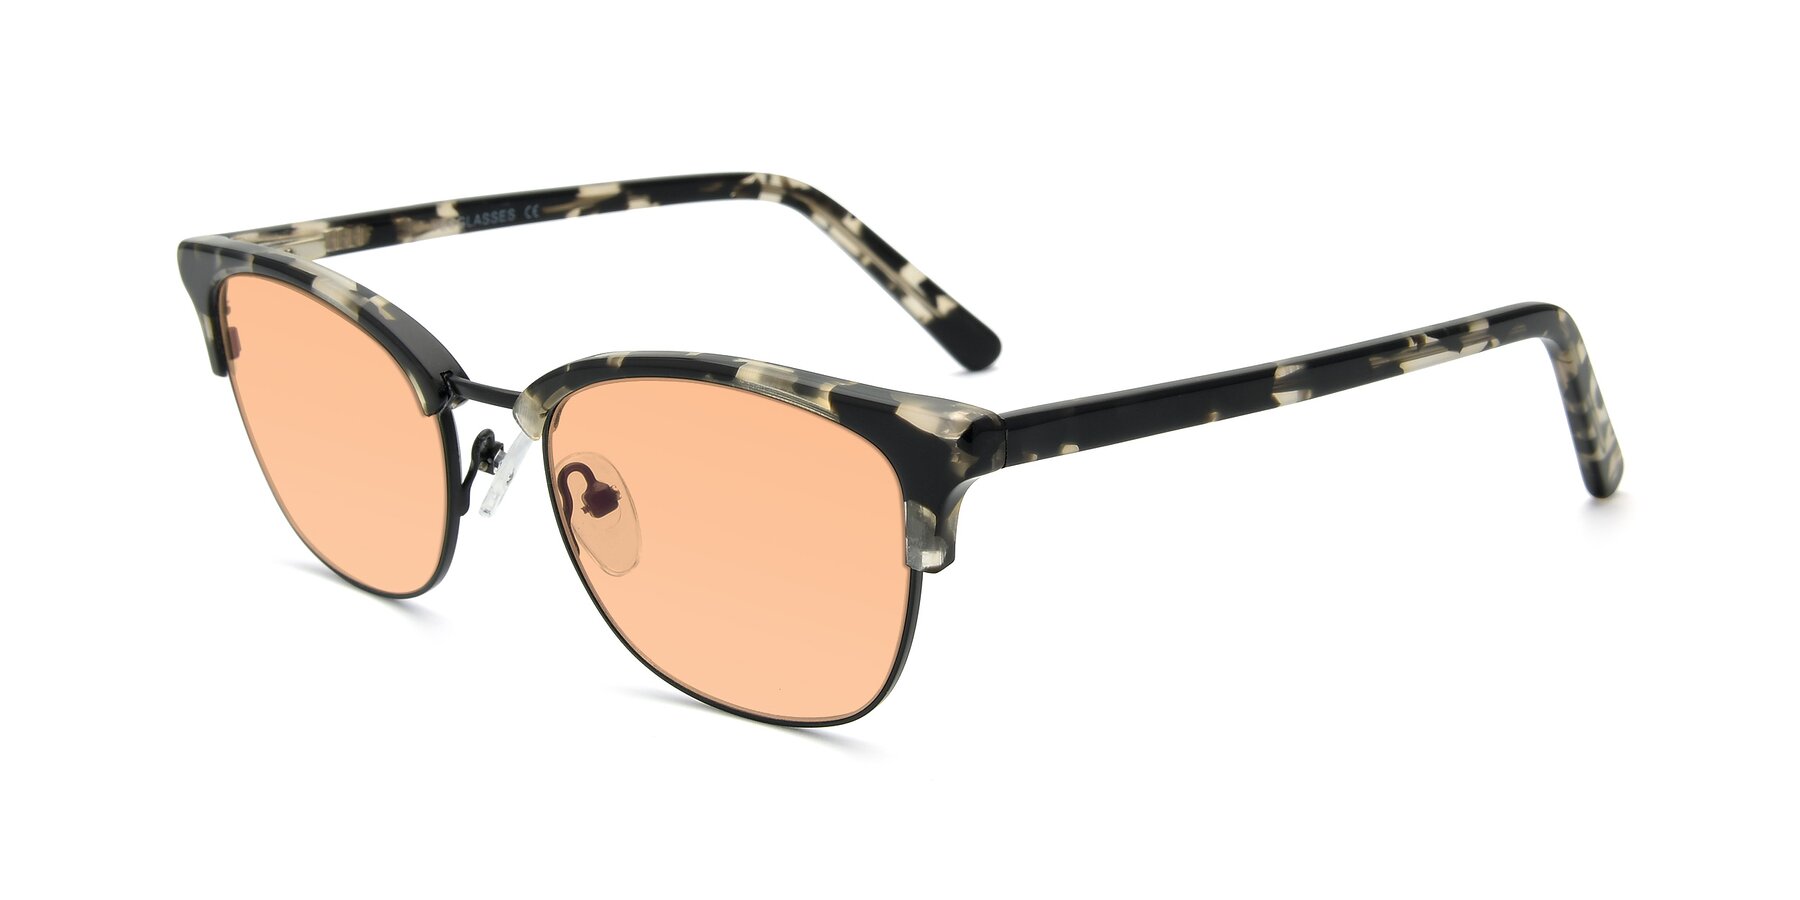 Angle of 17463 in Black-Tortoise with Light Orange Tinted Lenses